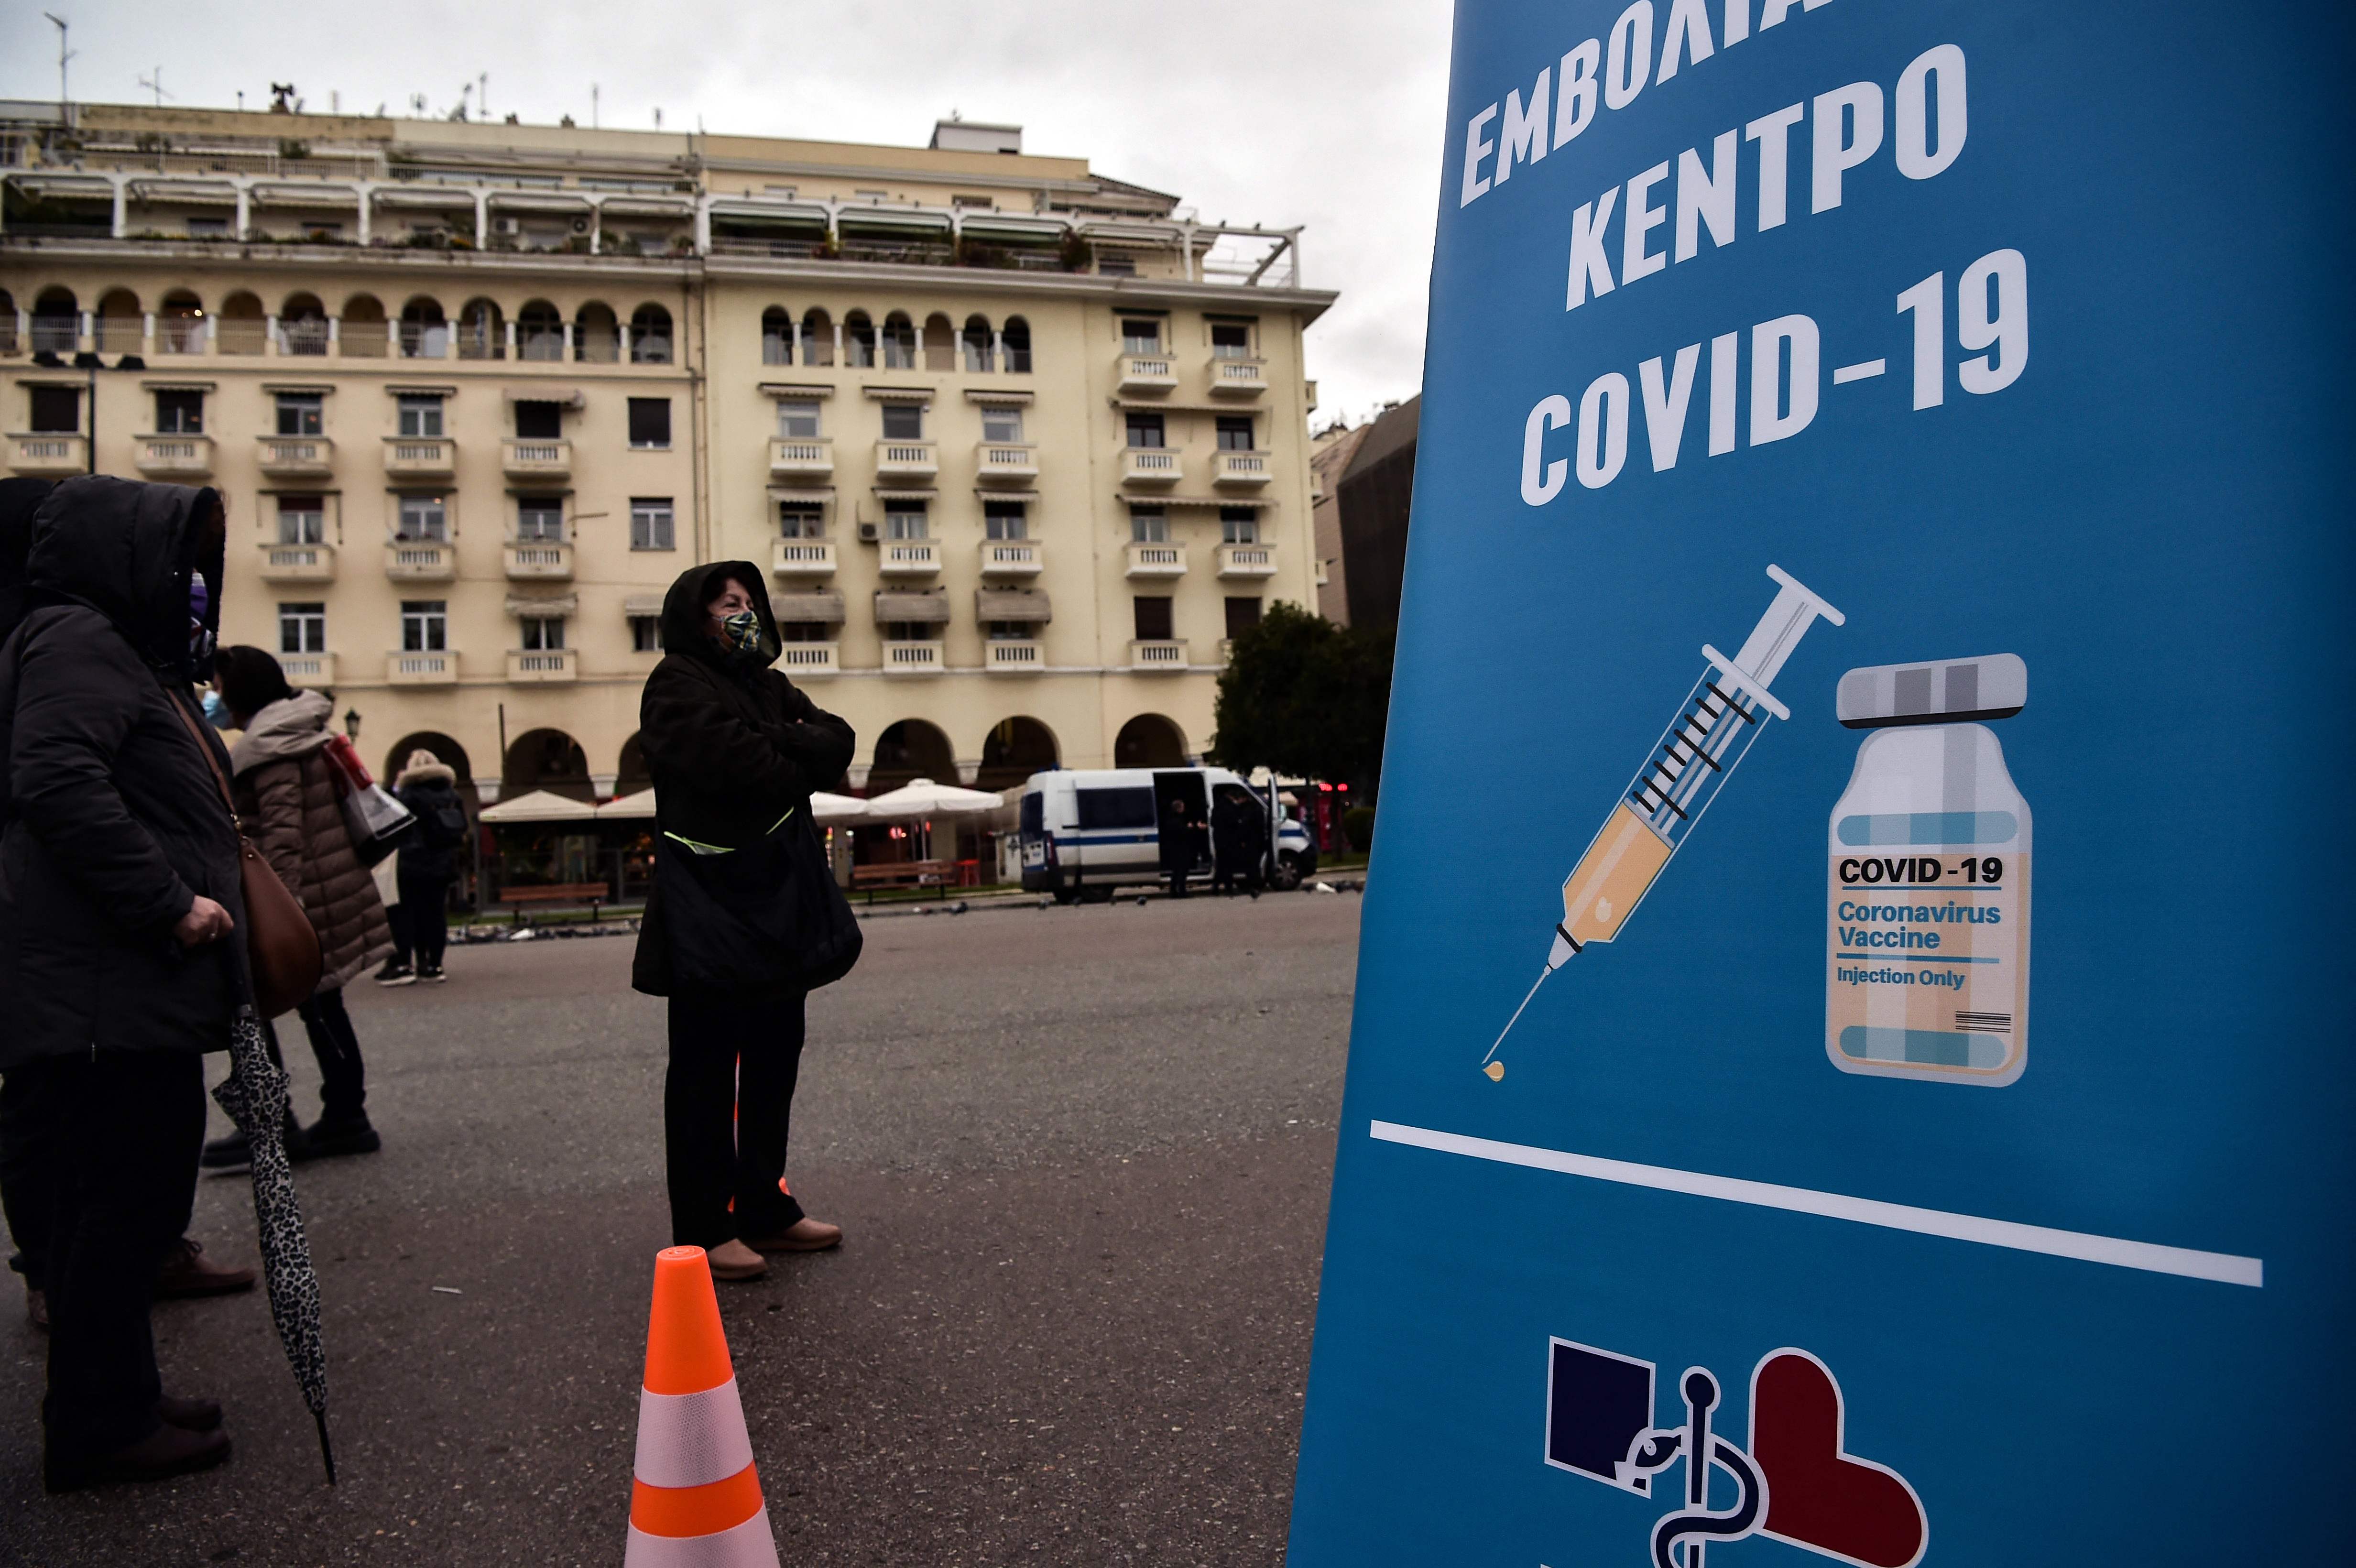 Patients queue to get vaccinated against Covid-19, in Aristotelous Square, in the center of Thessaloniki